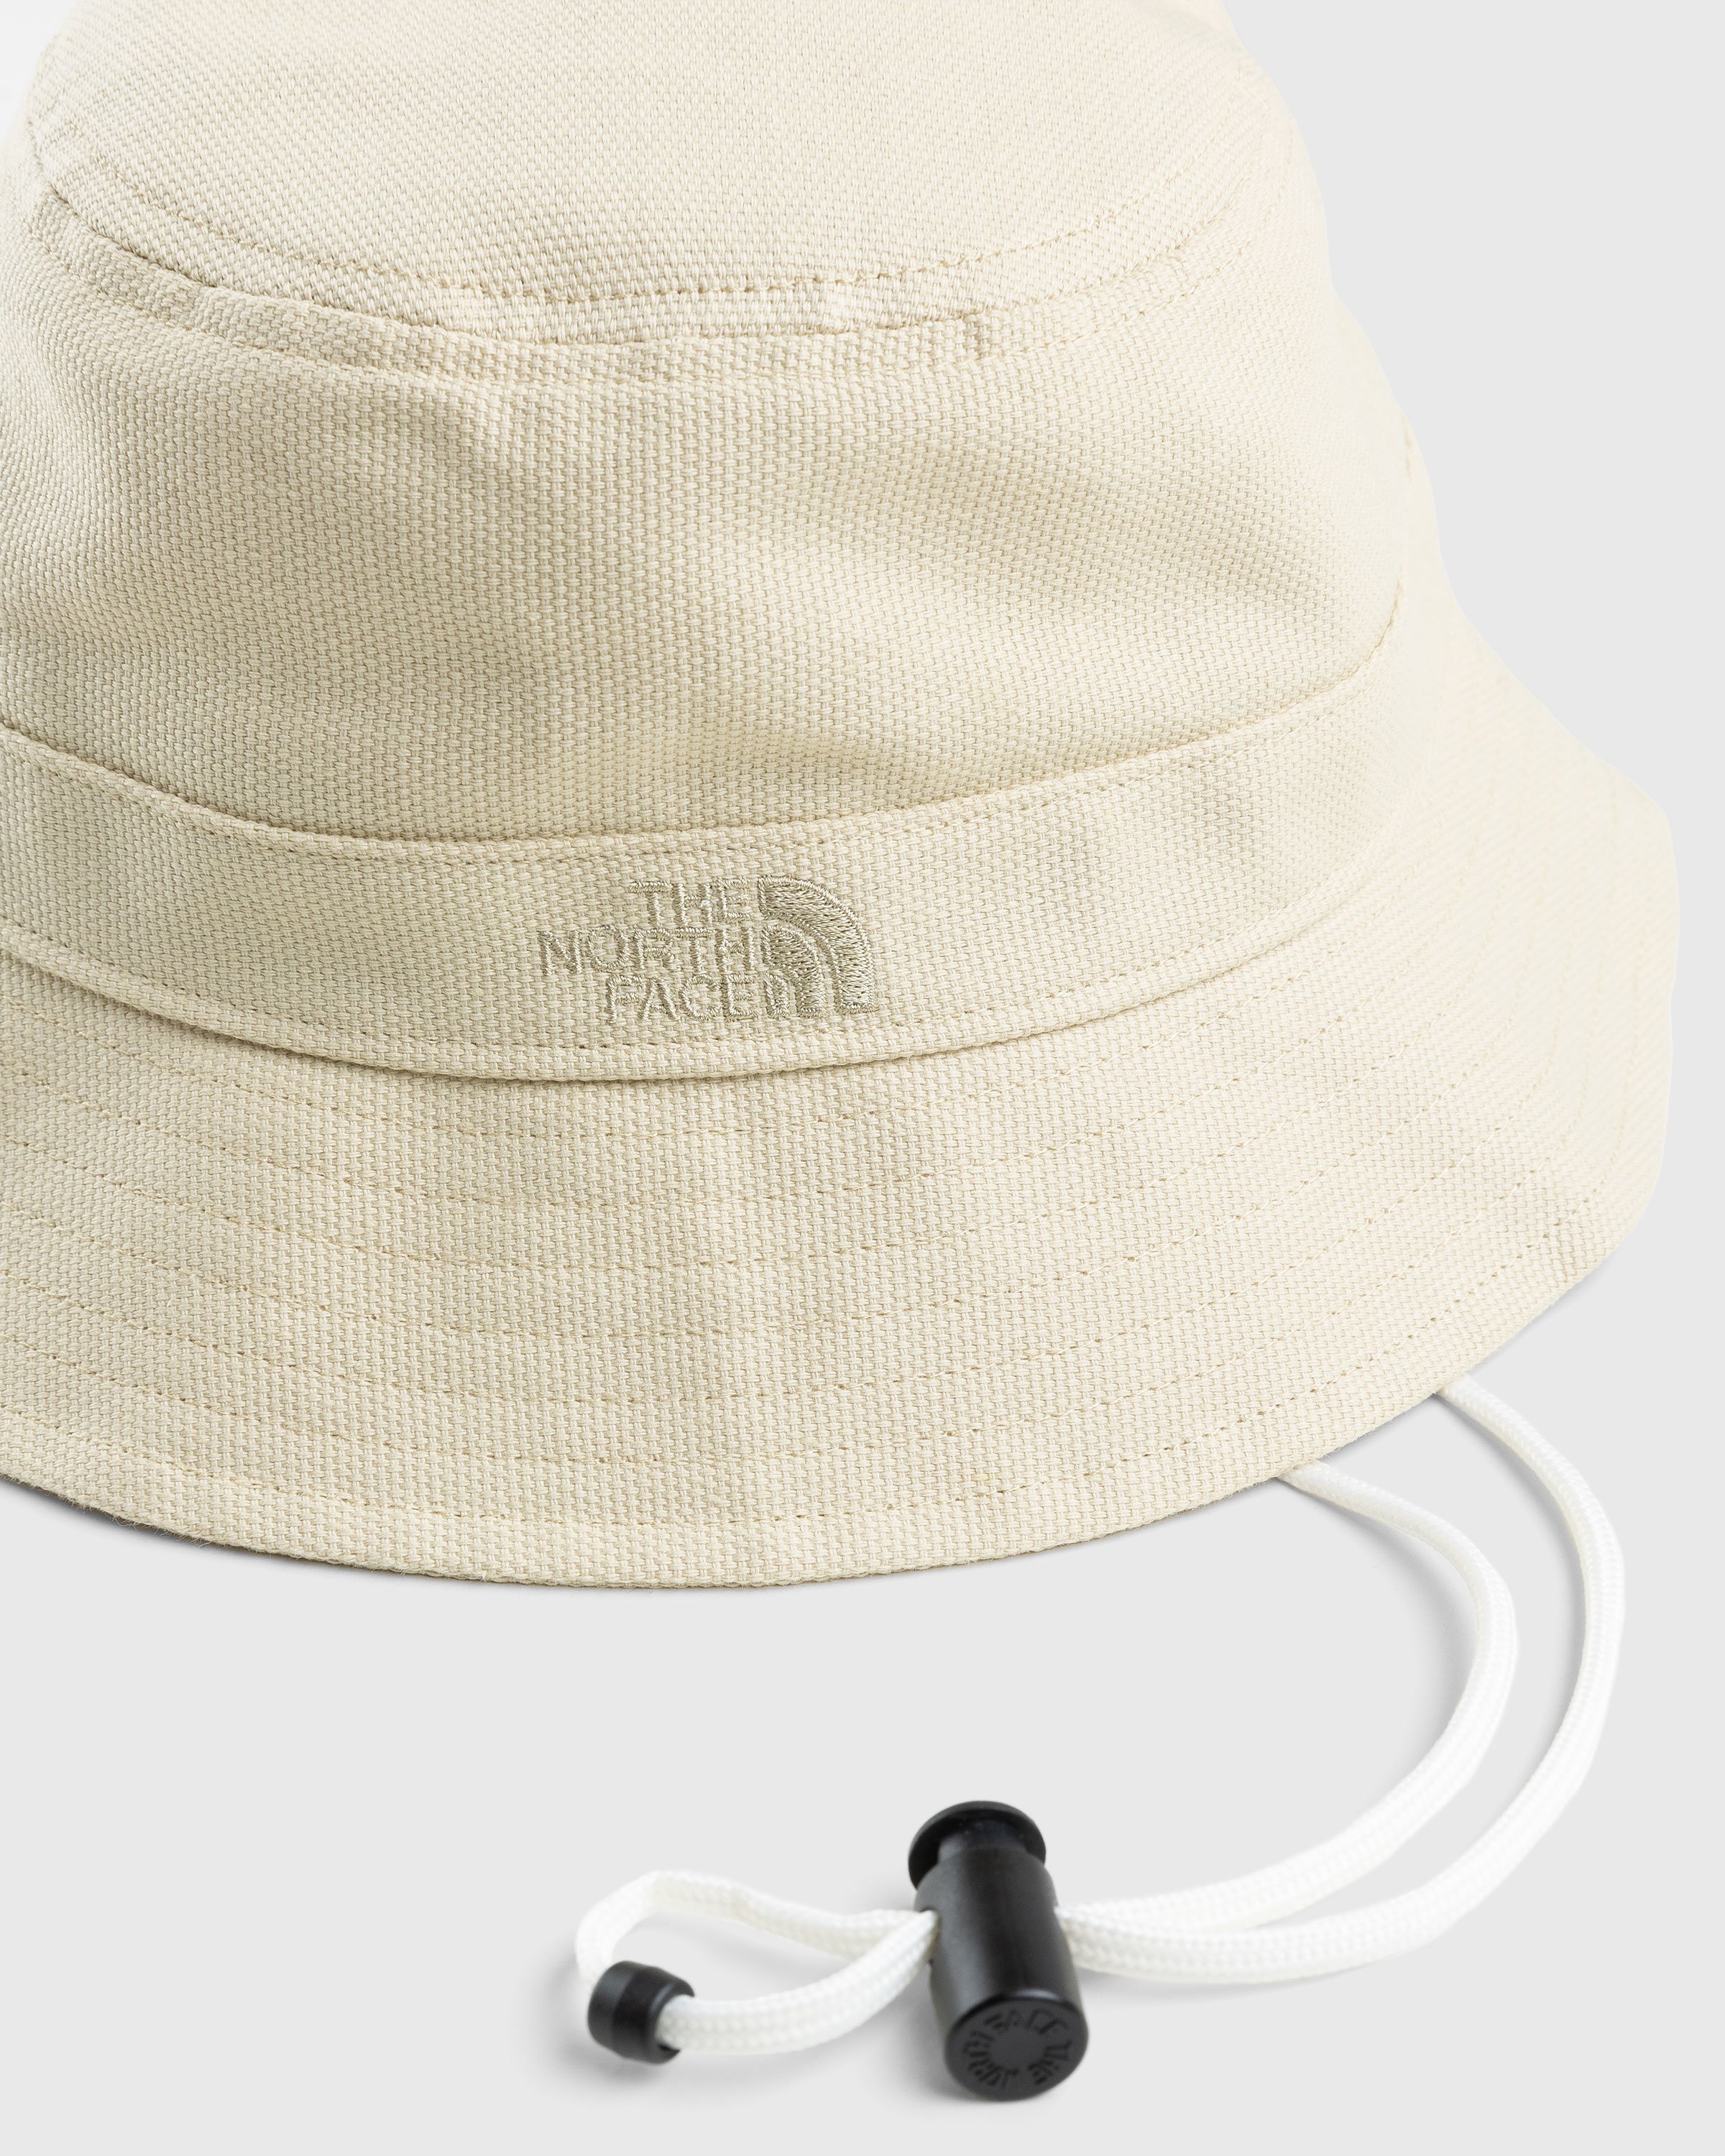 The North Face - Mountain Bucket Hat Gravel - Accessories - Beige - Image 3